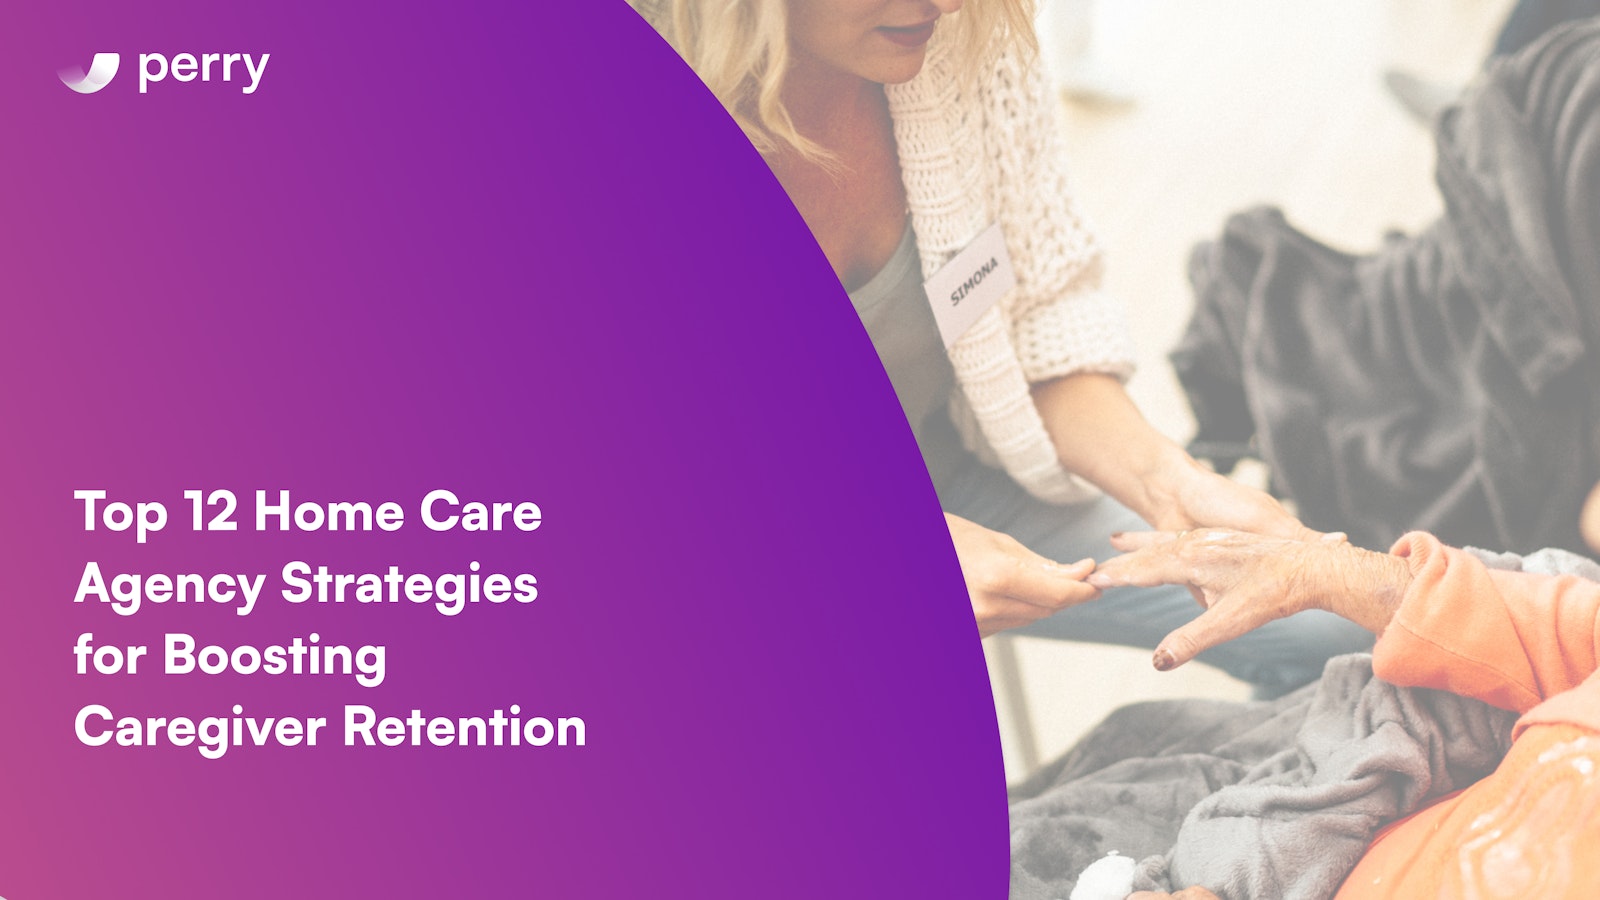 Top 12 Home Care Agency Strategies for Boosting Caregiver Retention